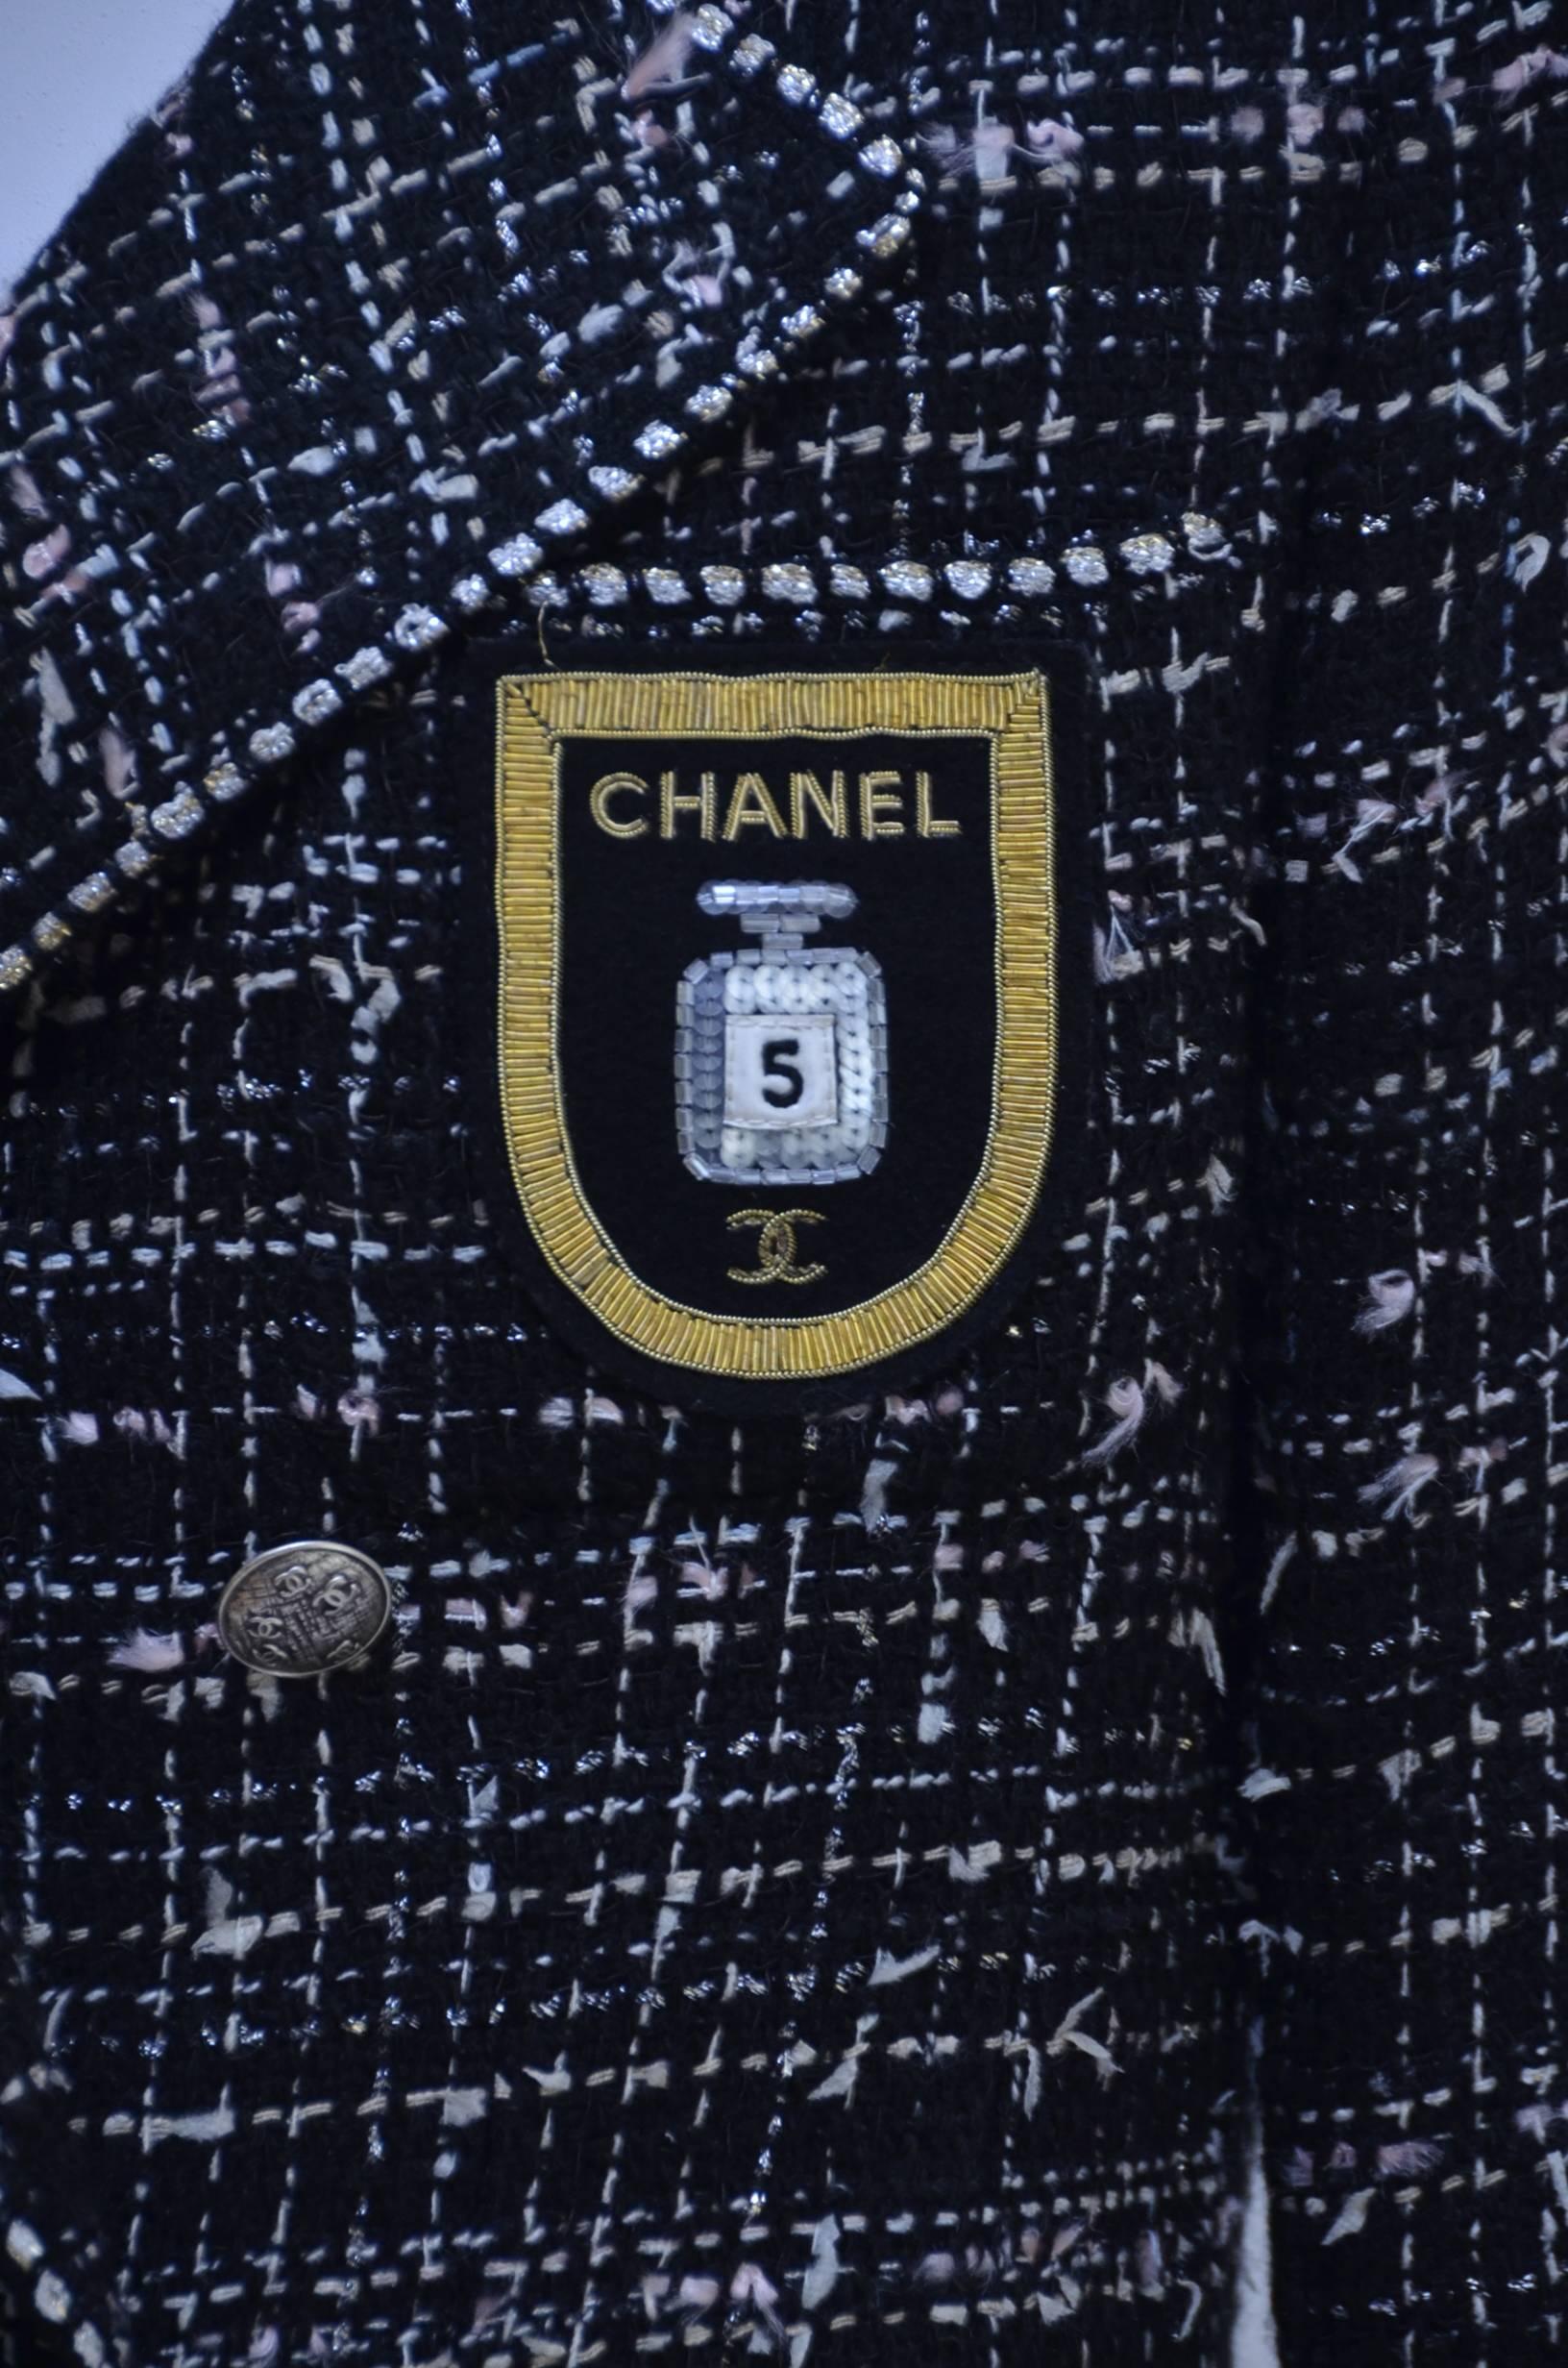 CHANEL '04 Coat   With Chanel  # 5 Parfume Bottle  Patch     34 6